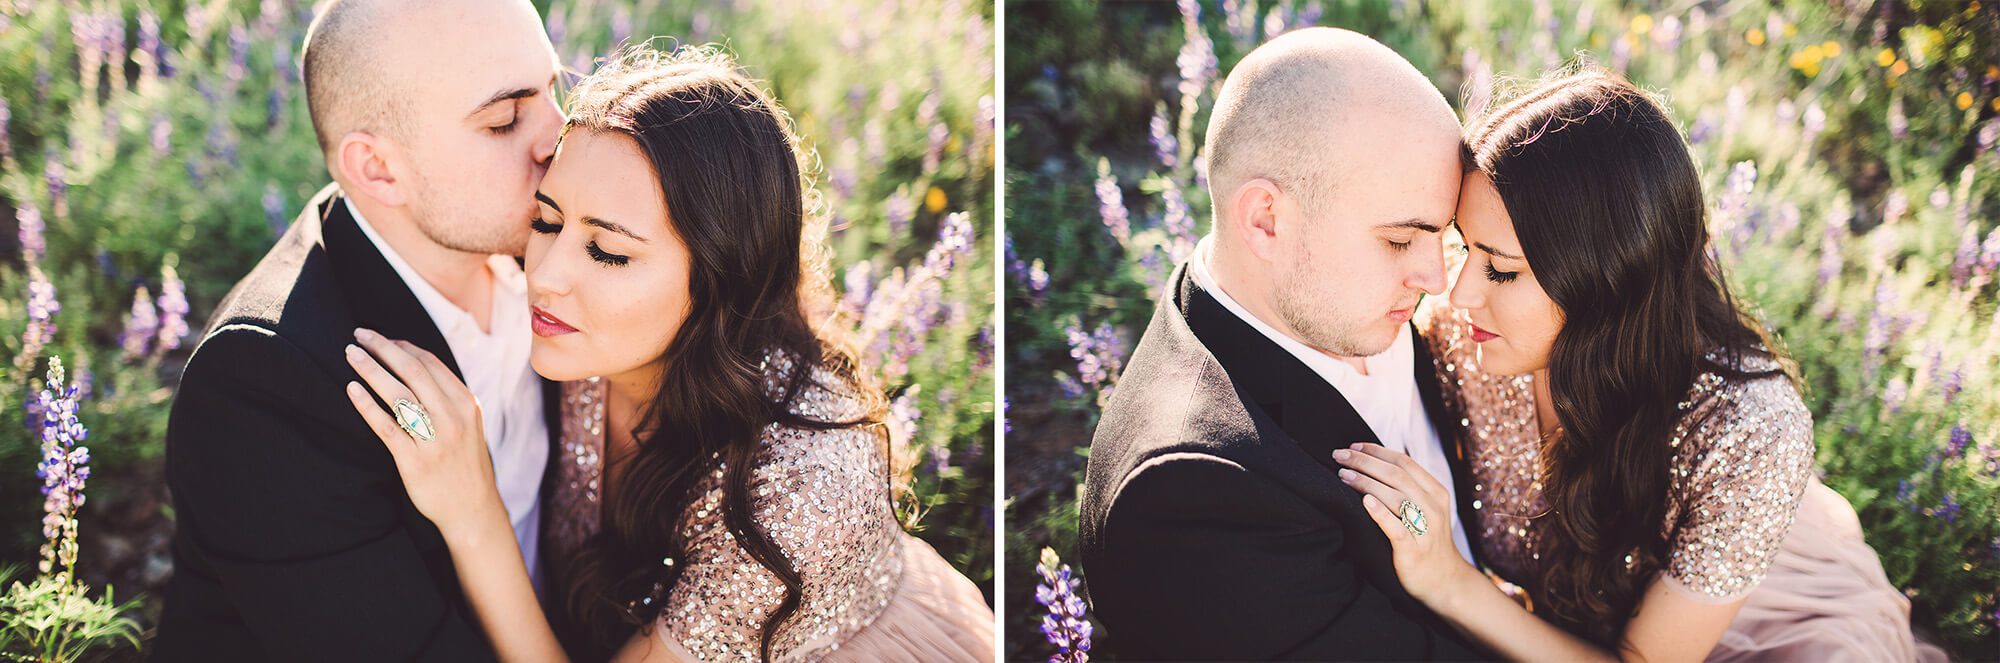 The Paxman's get cozy amongst the wildflowers at Picacho Peak during their couple's session